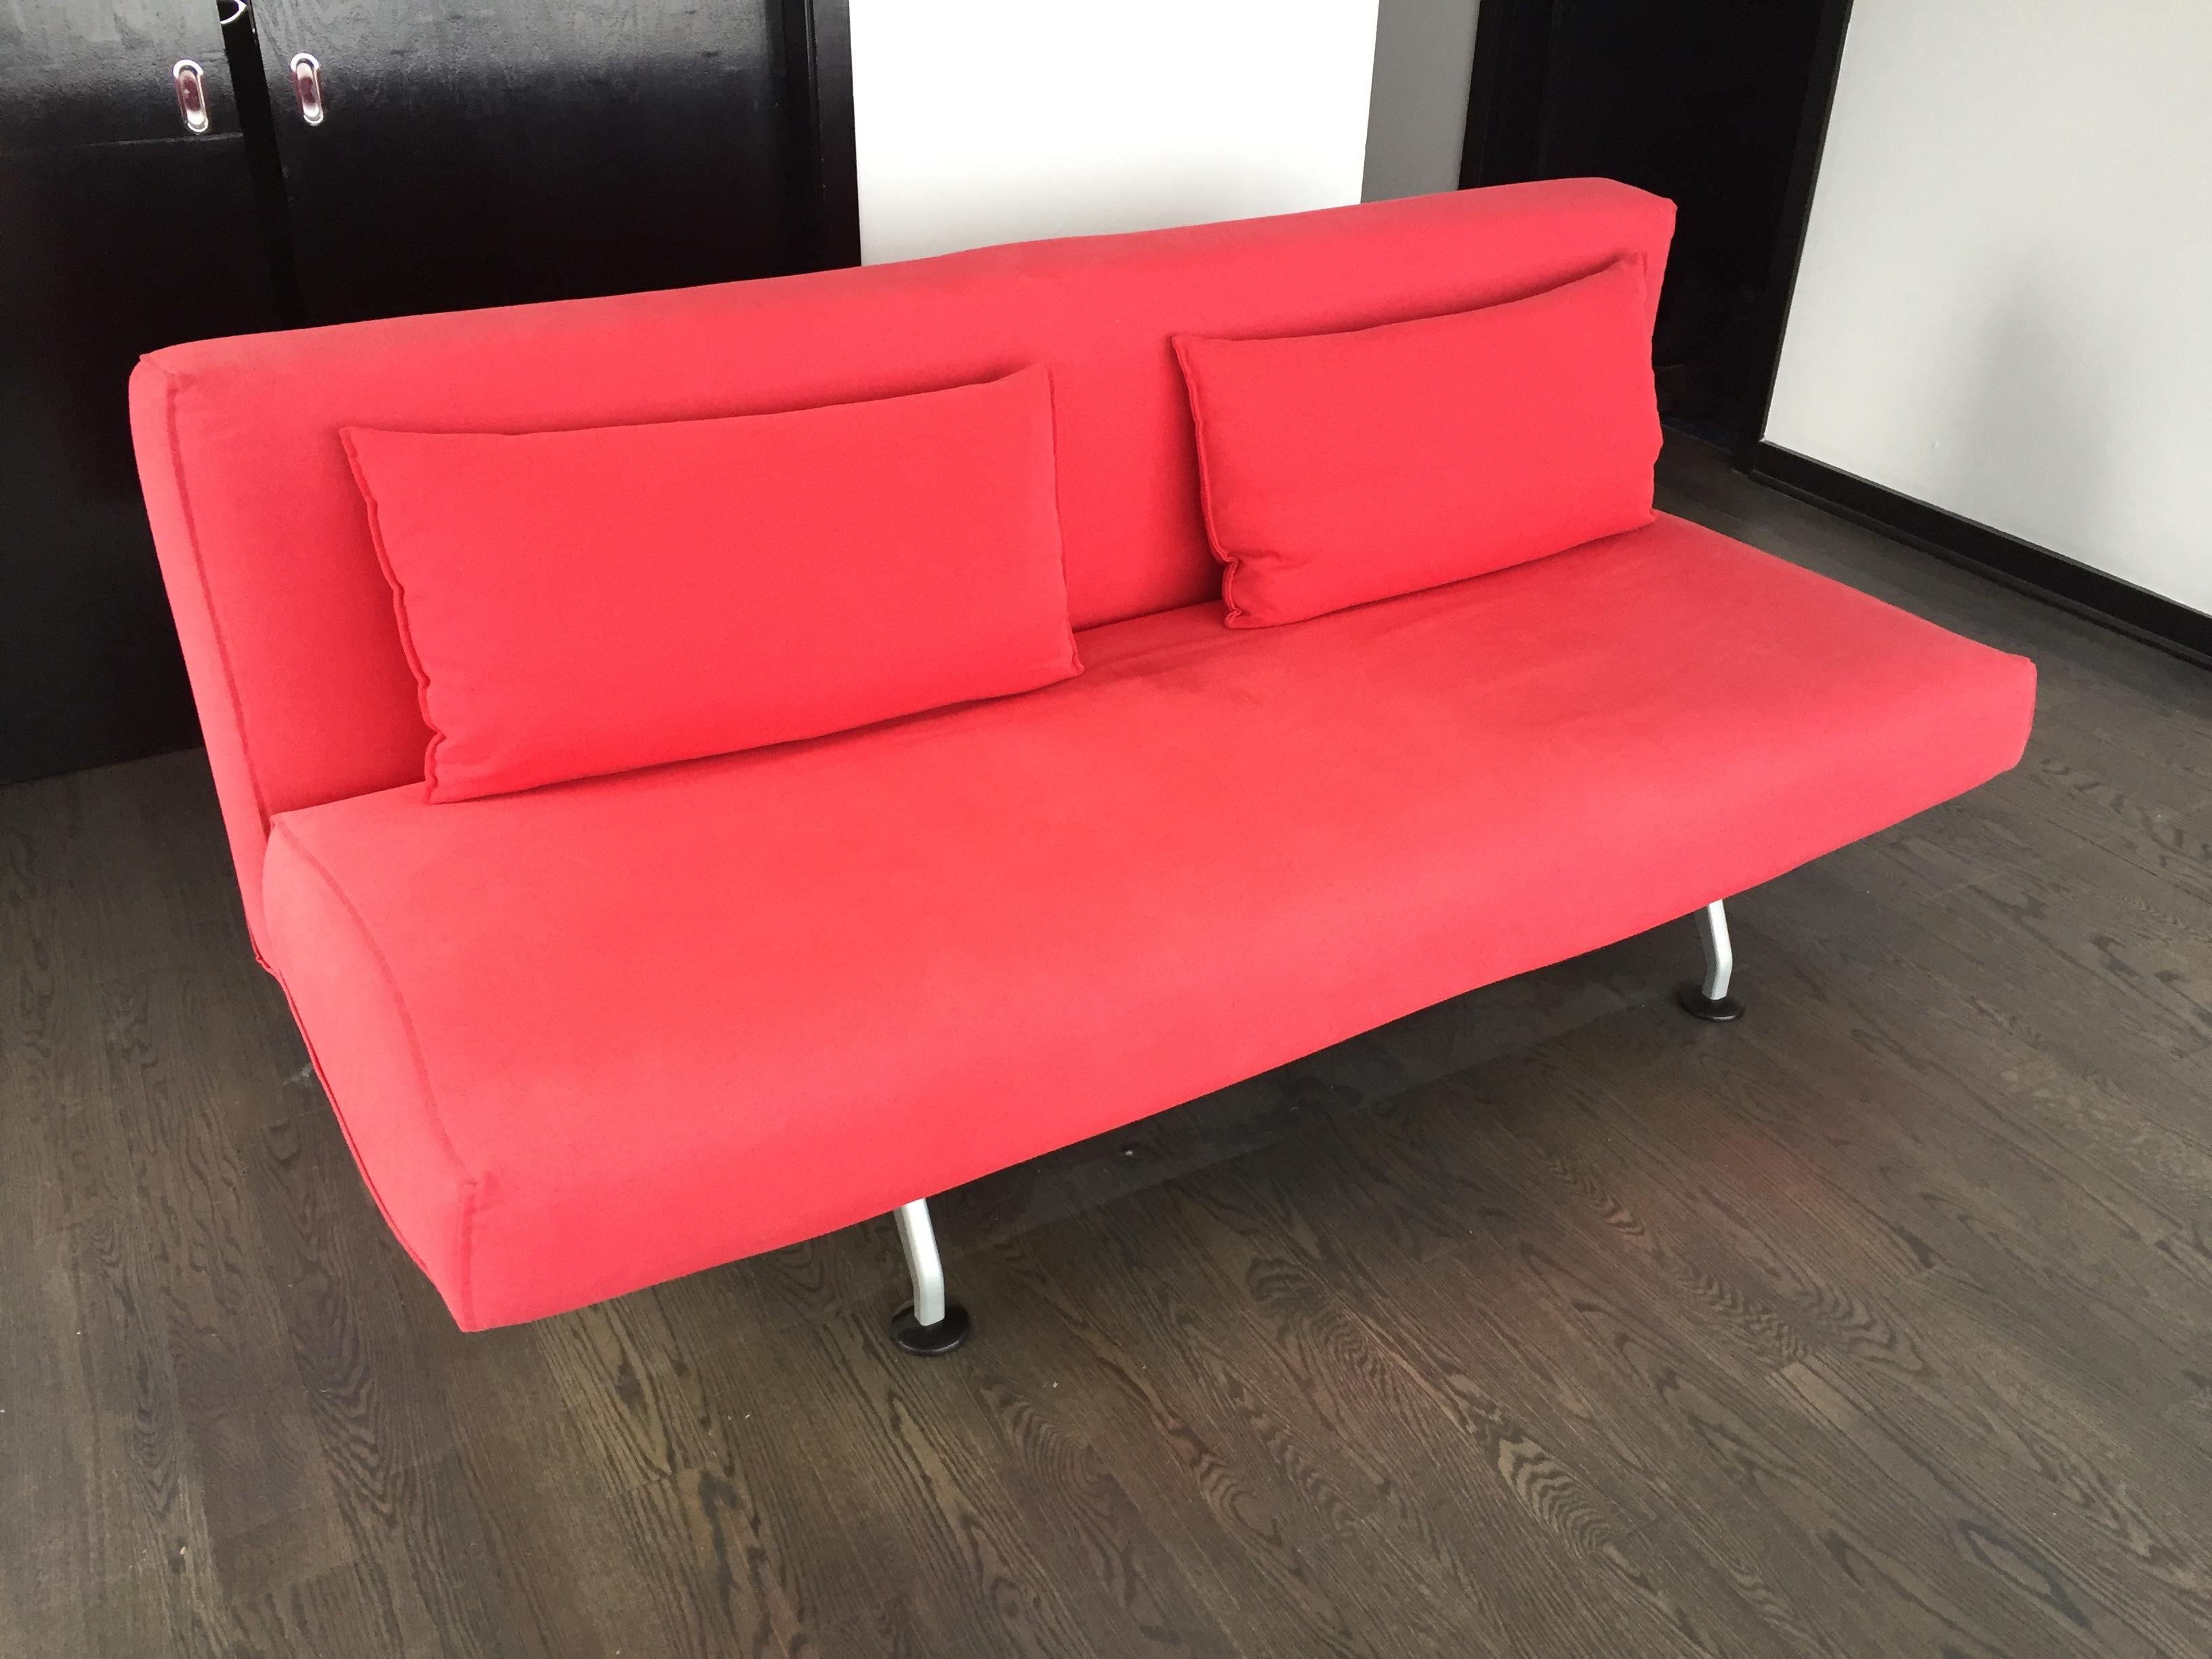 Contemporary Mid-Century Modern Eames Design Within Reach Sliding Sofa For Sale